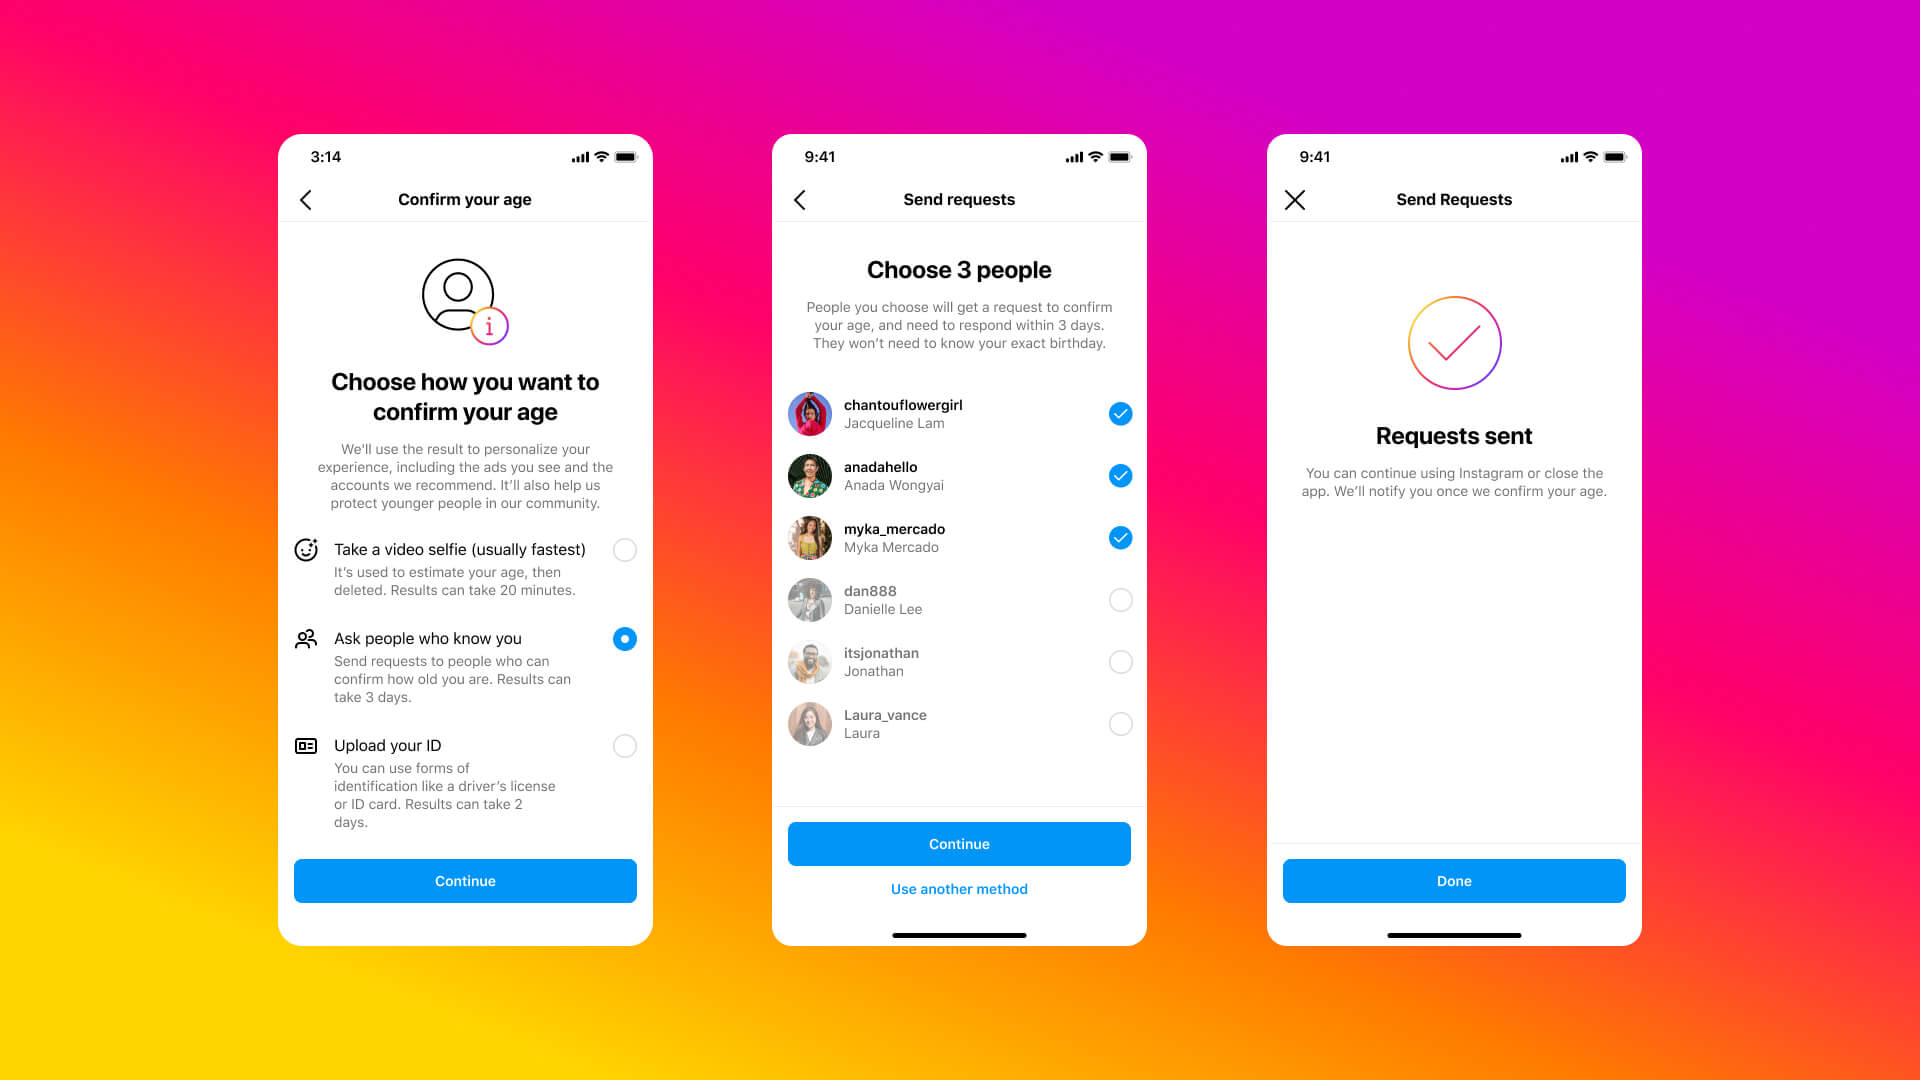 This Week in Apps: Jack Dorsey-backed Bluesky, social apps’ teen protections, Twitter clients get help